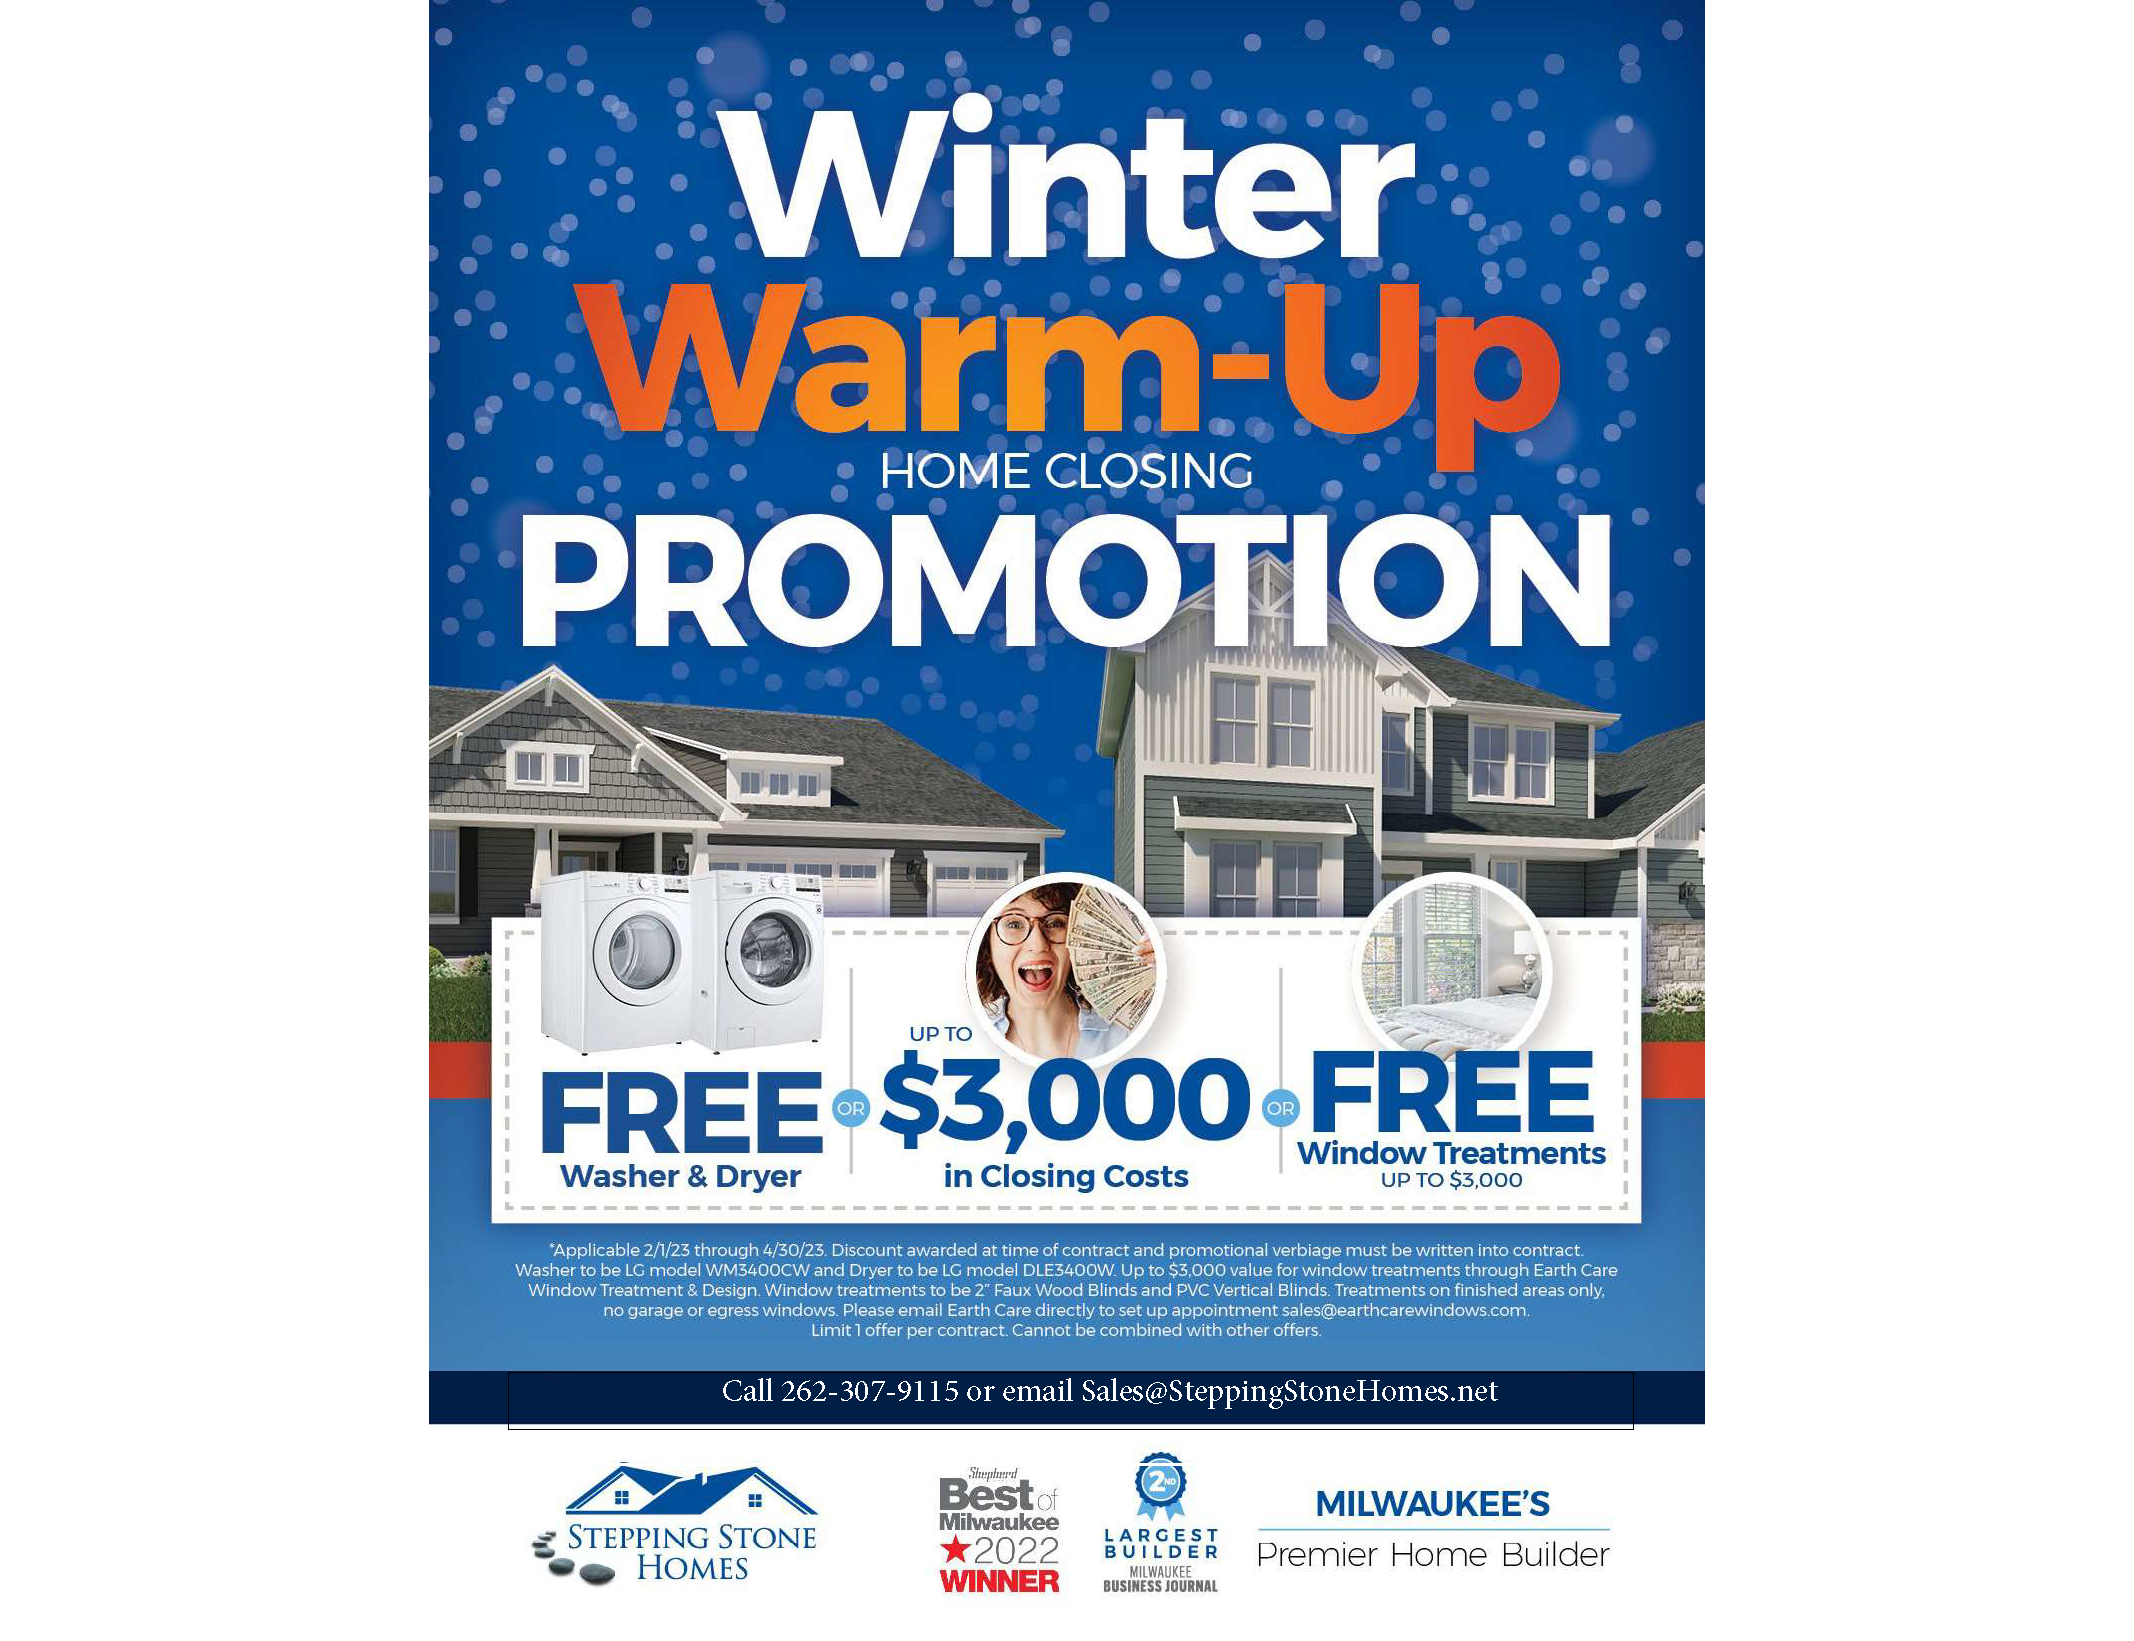 New home closing promotion